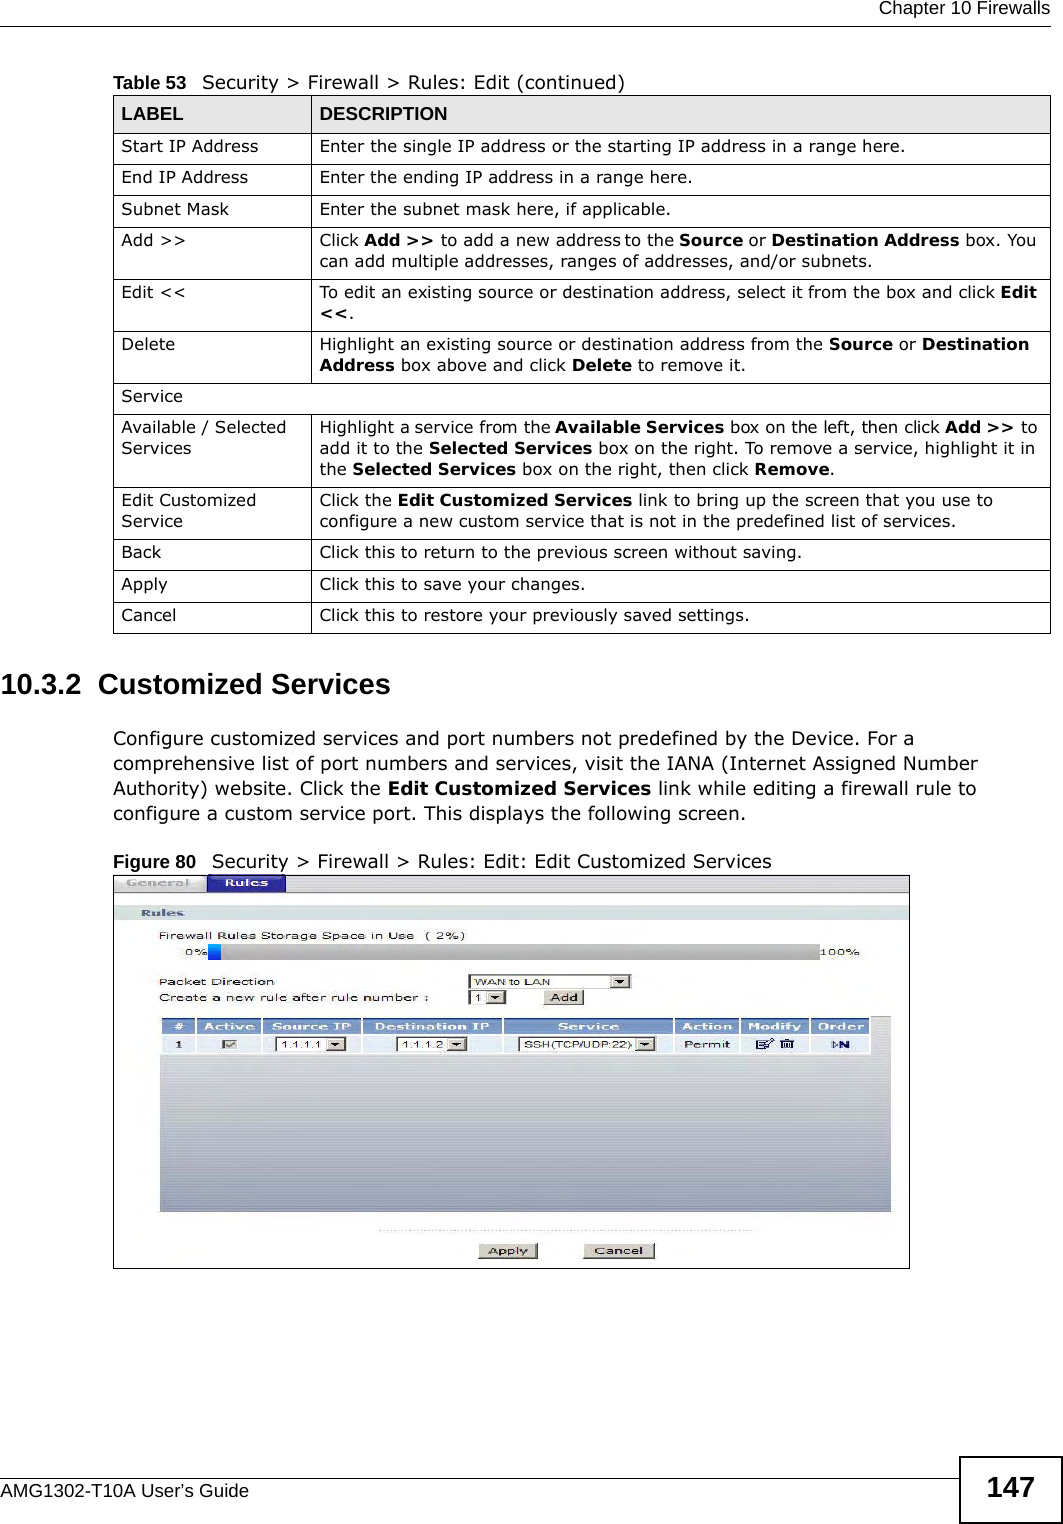  Chapter 10 FirewallsAMG1302-T10A User’s Guide 14710.3.2  Customized Services Configure customized services and port numbers not predefined by the Device. For a comprehensive list of port numbers and services, visit the IANA (Internet Assigned Number Authority) website. Click the Edit Customized Services link while editing a firewall rule to configure a custom service port. This displays the following screen.Figure 80   Security &gt; Firewall &gt; Rules: Edit: Edit Customized ServicesStart IP Address Enter the single IP address or the starting IP address in a range here. End IP Address Enter the ending IP address in a range here.Subnet Mask Enter the subnet mask here, if applicable.Add &gt;&gt; Click Add &gt;&gt; to add a new address to the Source or Destination Address box. You can add multiple addresses, ranges of addresses, and/or subnets.Edit &lt;&lt; To edit an existing source or destination address, select it from the box and click Edit &lt;&lt;.Delete Highlight an existing source or destination address from the Source or Destination Address box above and click Delete to remove it.ServiceAvailable / Selected ServicesHighlight a service from the Available Services box on the left, then click Add &gt;&gt; to add it to the Selected Services box on the right. To remove a service, highlight it in the Selected Services box on the right, then click Remove.Edit Customized ServiceClick the Edit Customized Services link to bring up the screen that you use to configure a new custom service that is not in the predefined list of services.Back Click this to return to the previous screen without saving.Apply Click this to save your changes.Cancel Click this to restore your previously saved settings.Table 53   Security &gt; Firewall &gt; Rules: Edit (continued)LABEL DESCRIPTION